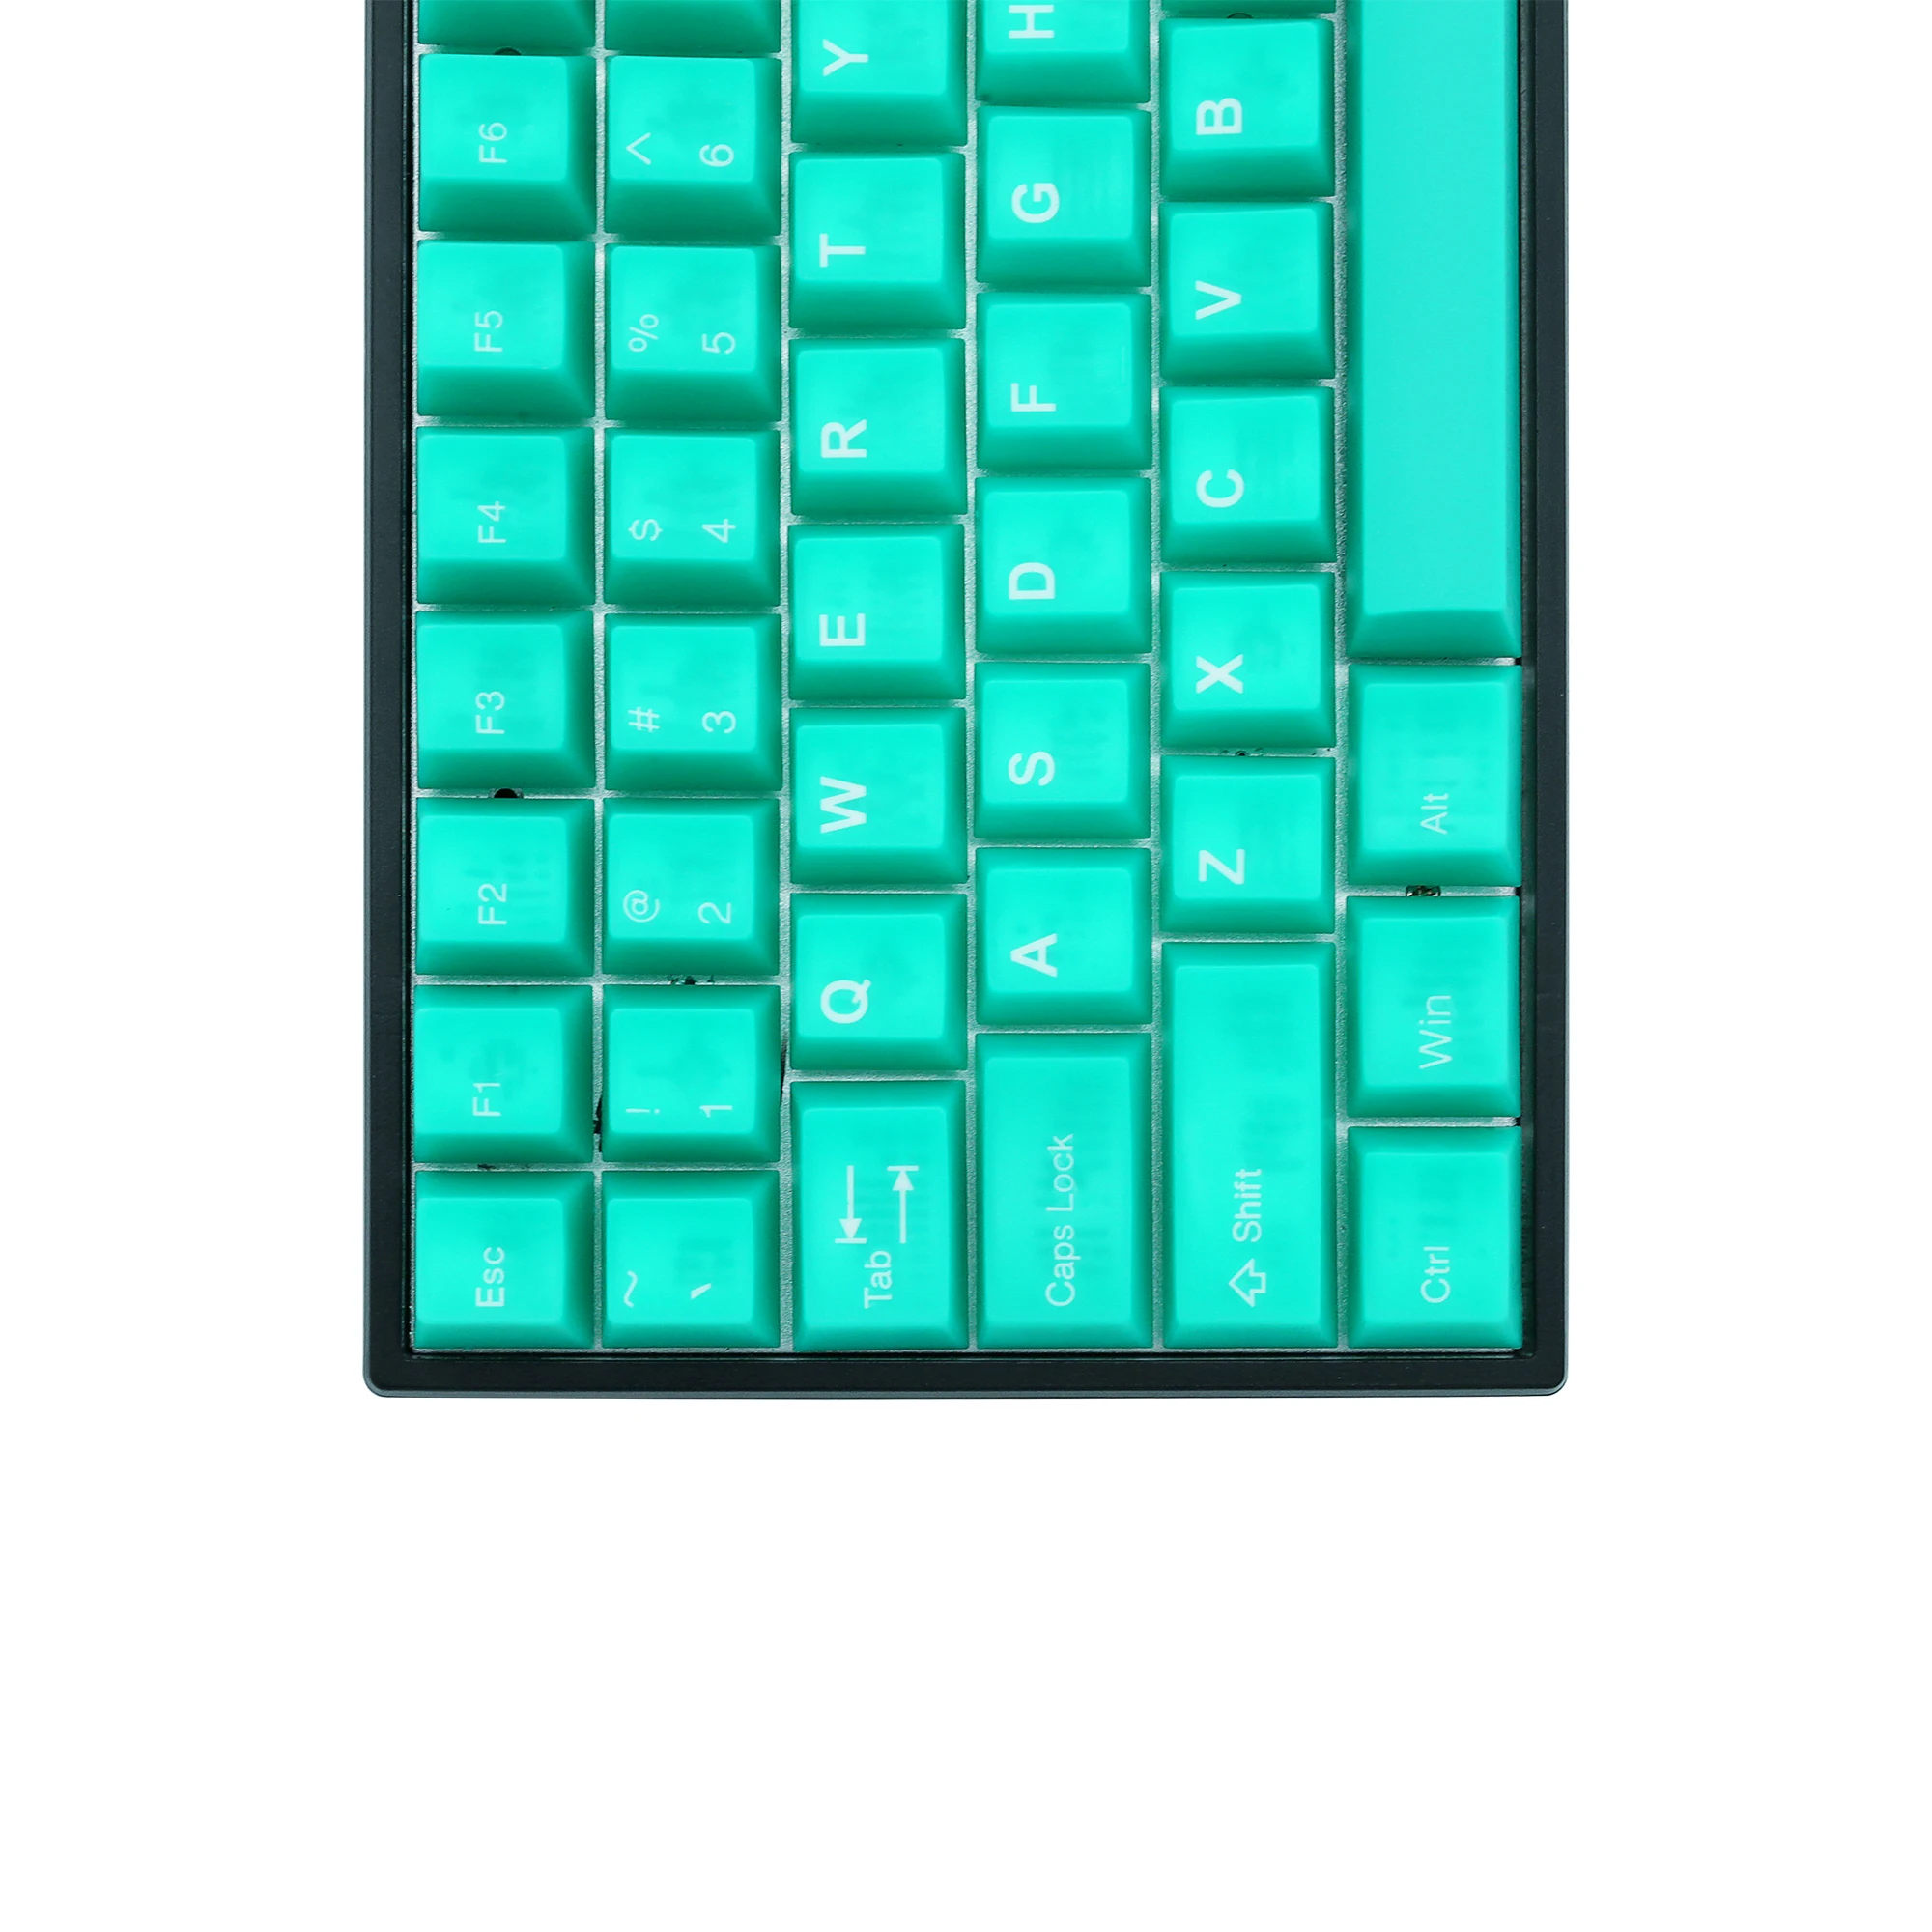 Taihao Haunted Jelly Jade ABS Doubleshot Keycap Translucent Cubic for mechanical keyboard color of Green Colorway 4 - Pudding Keycap